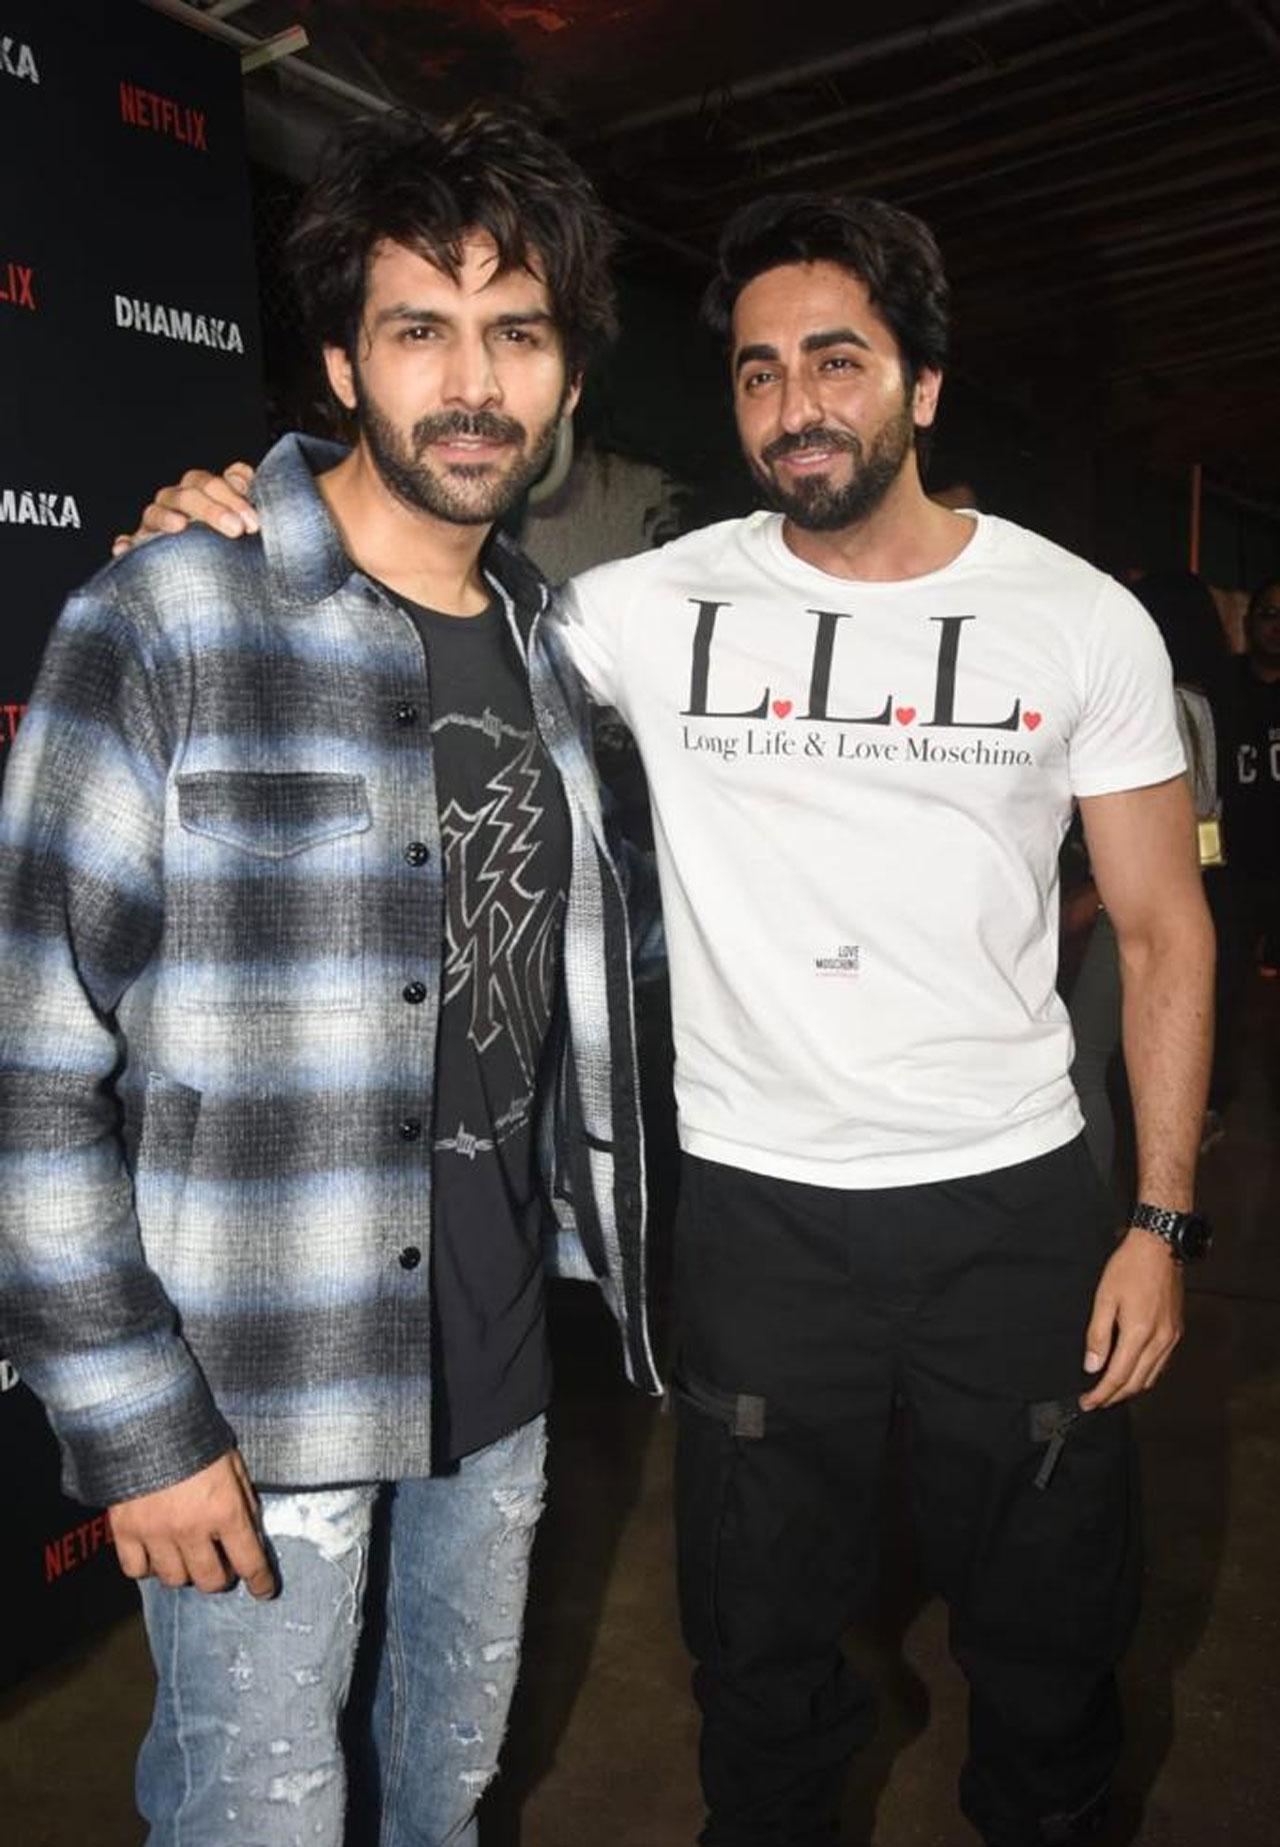 In another moment, KA and AK (Kartik Aaryan and Ayushmann Khurrana) were clicked together by the paparazzi. Would you like to see the duo in a film together?